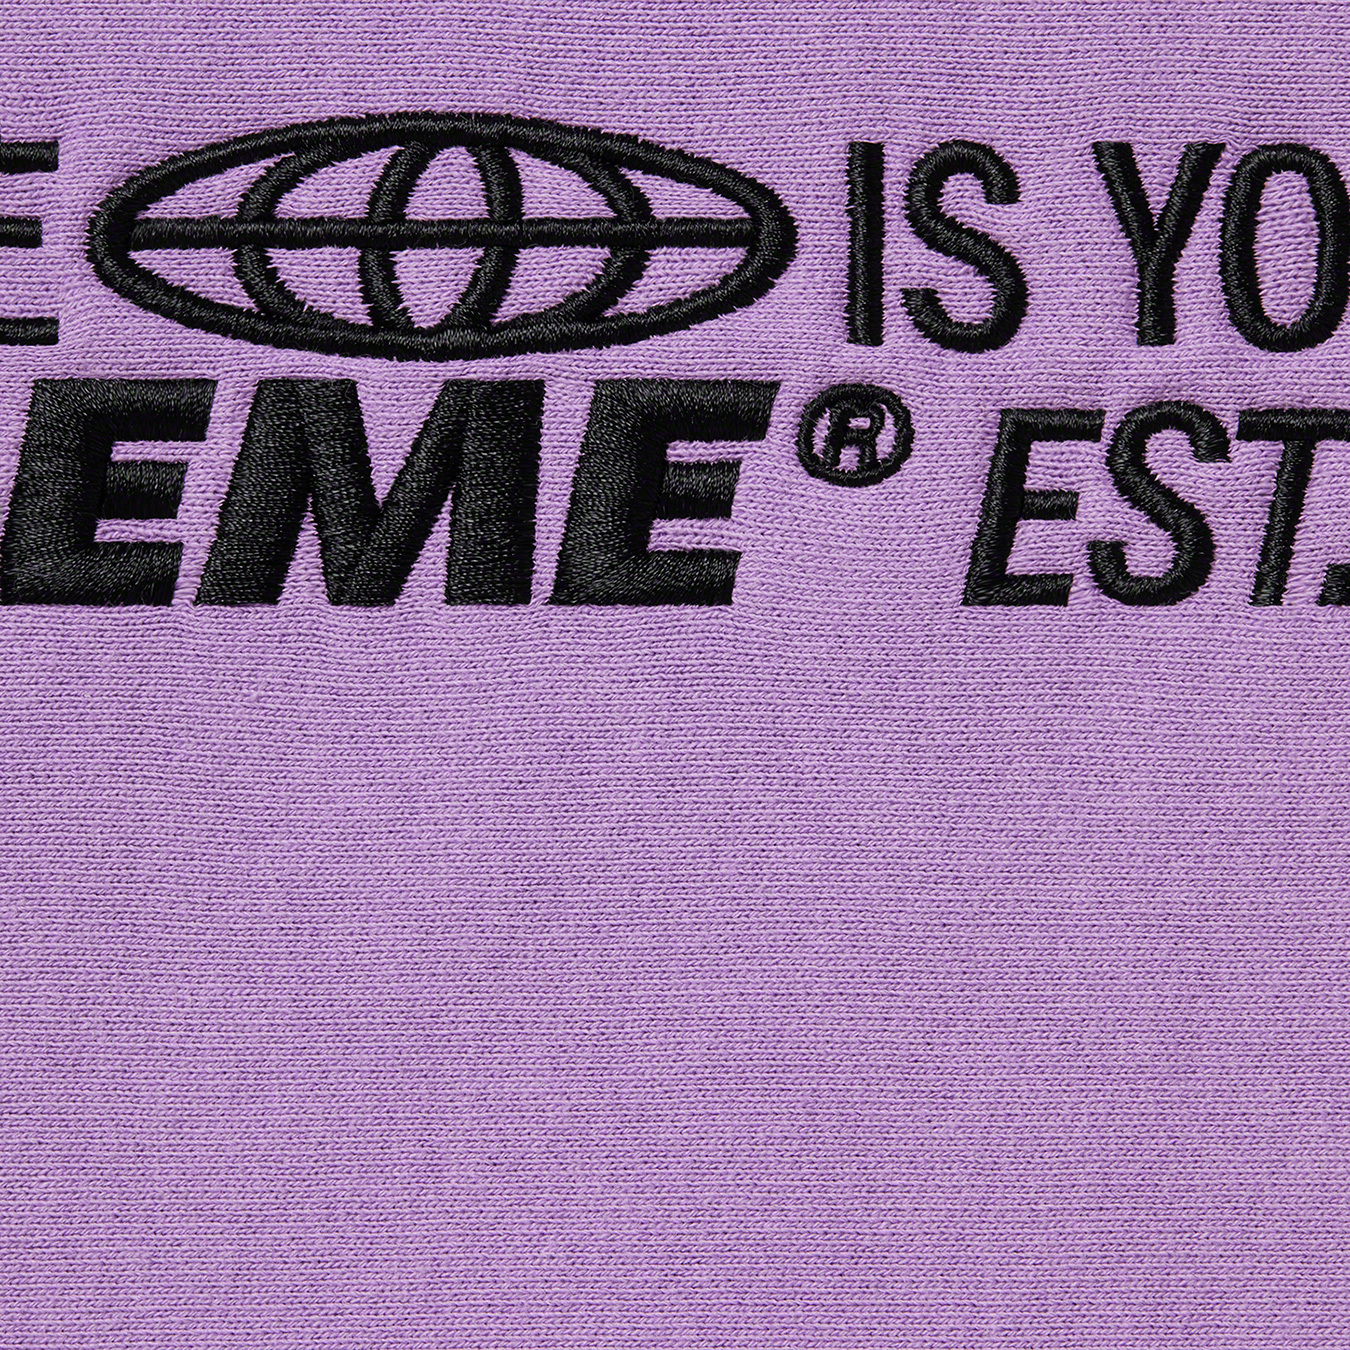 World Is Yours Hooded Sweatshirt - spring summer 2021 - Supreme